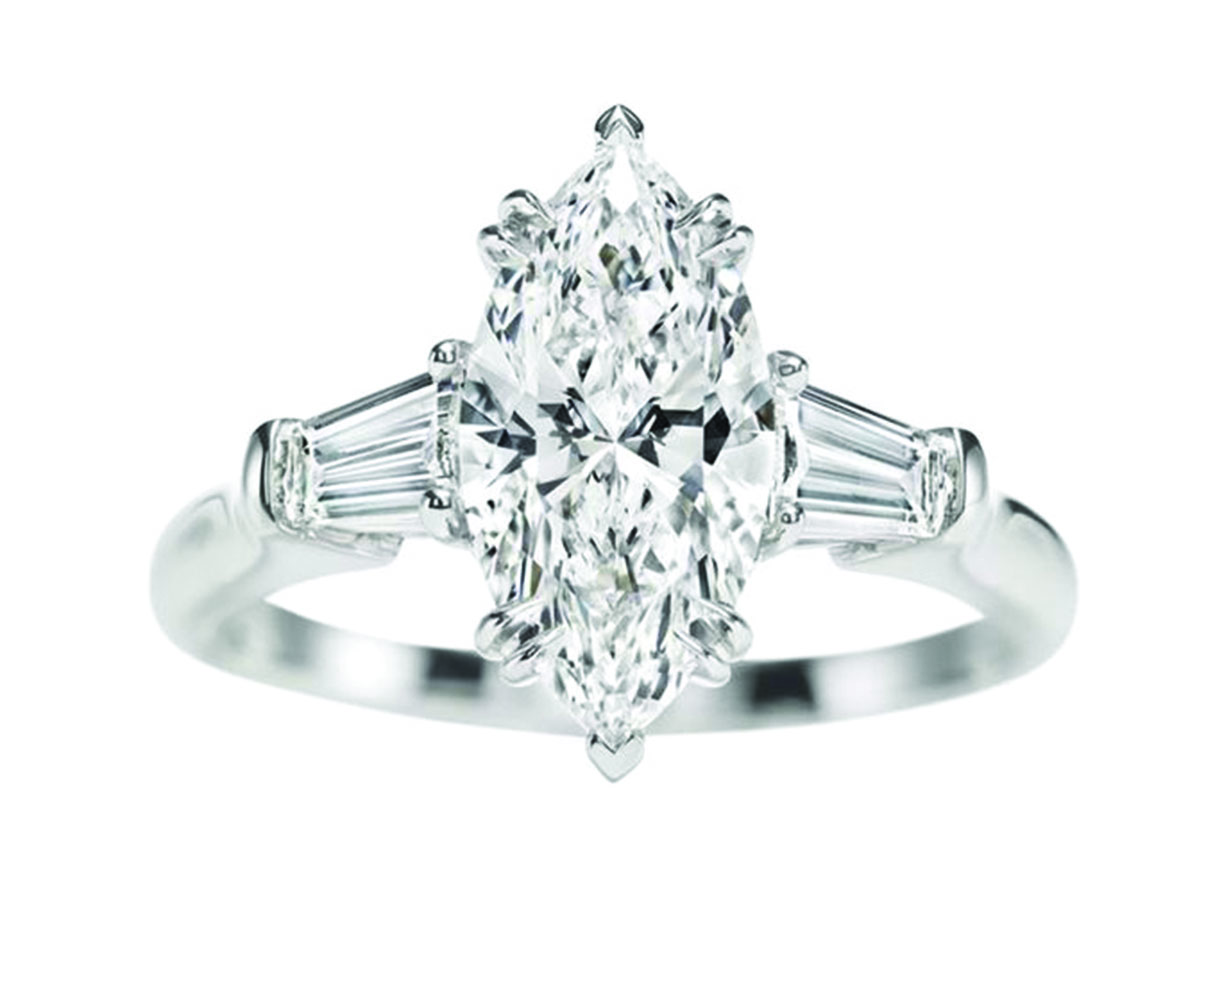 Marquise cut diamond ring with two side stones on a platinum band